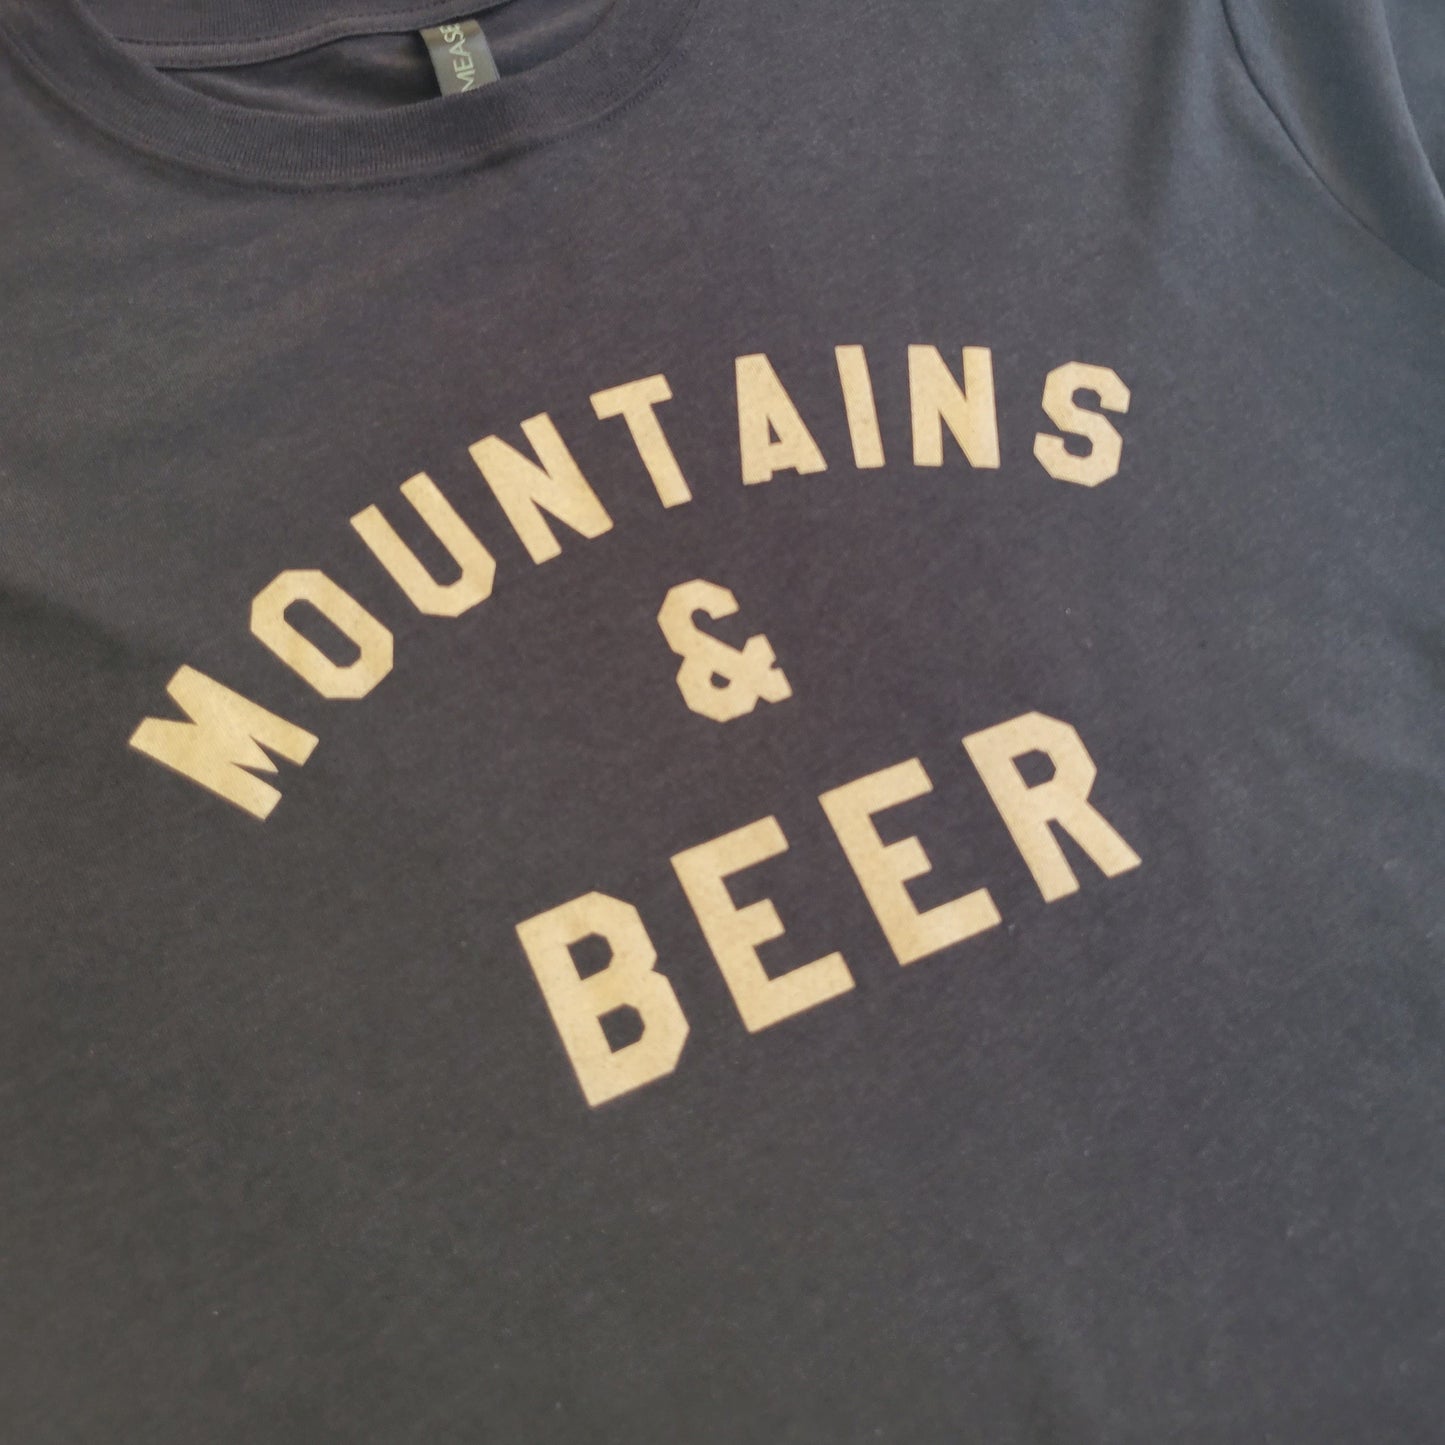 Mountains & Beer L/S Tee - Black (Distant Brewing Collab)